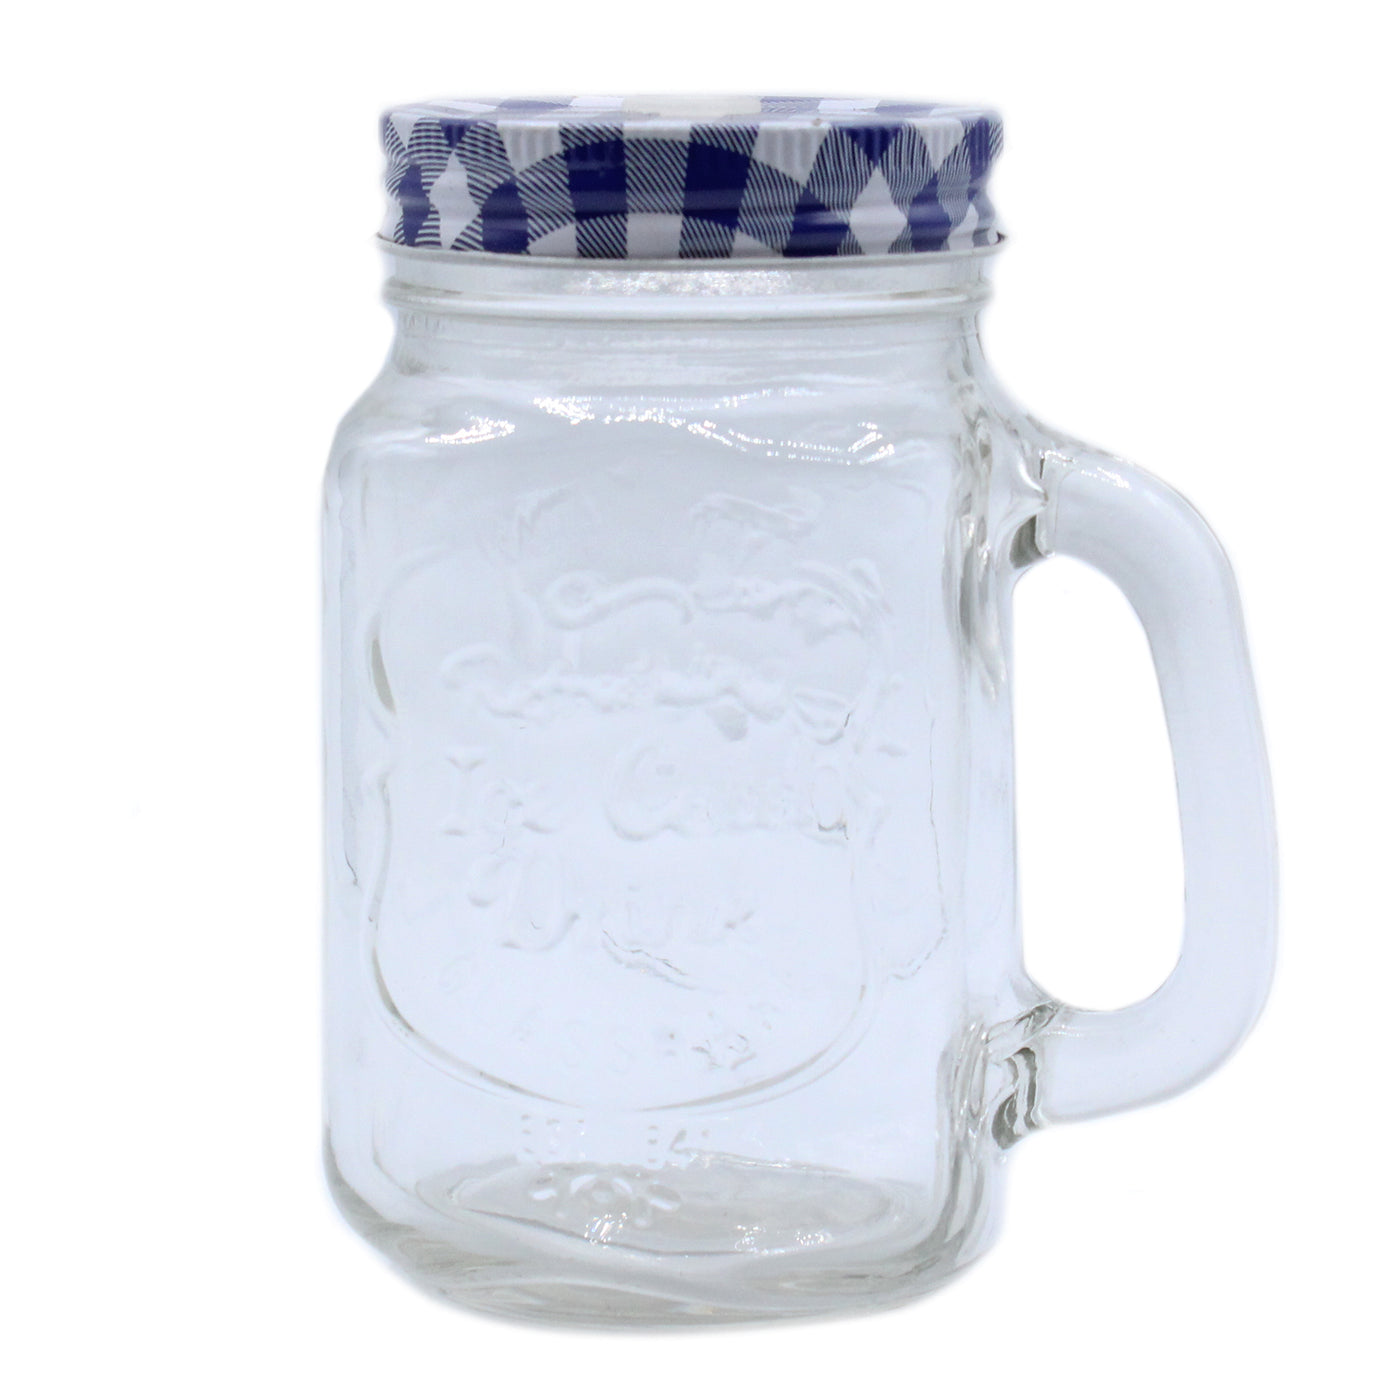 Retro Clear Mason Jar With Blue Checked Lid, For Cold Drinks.